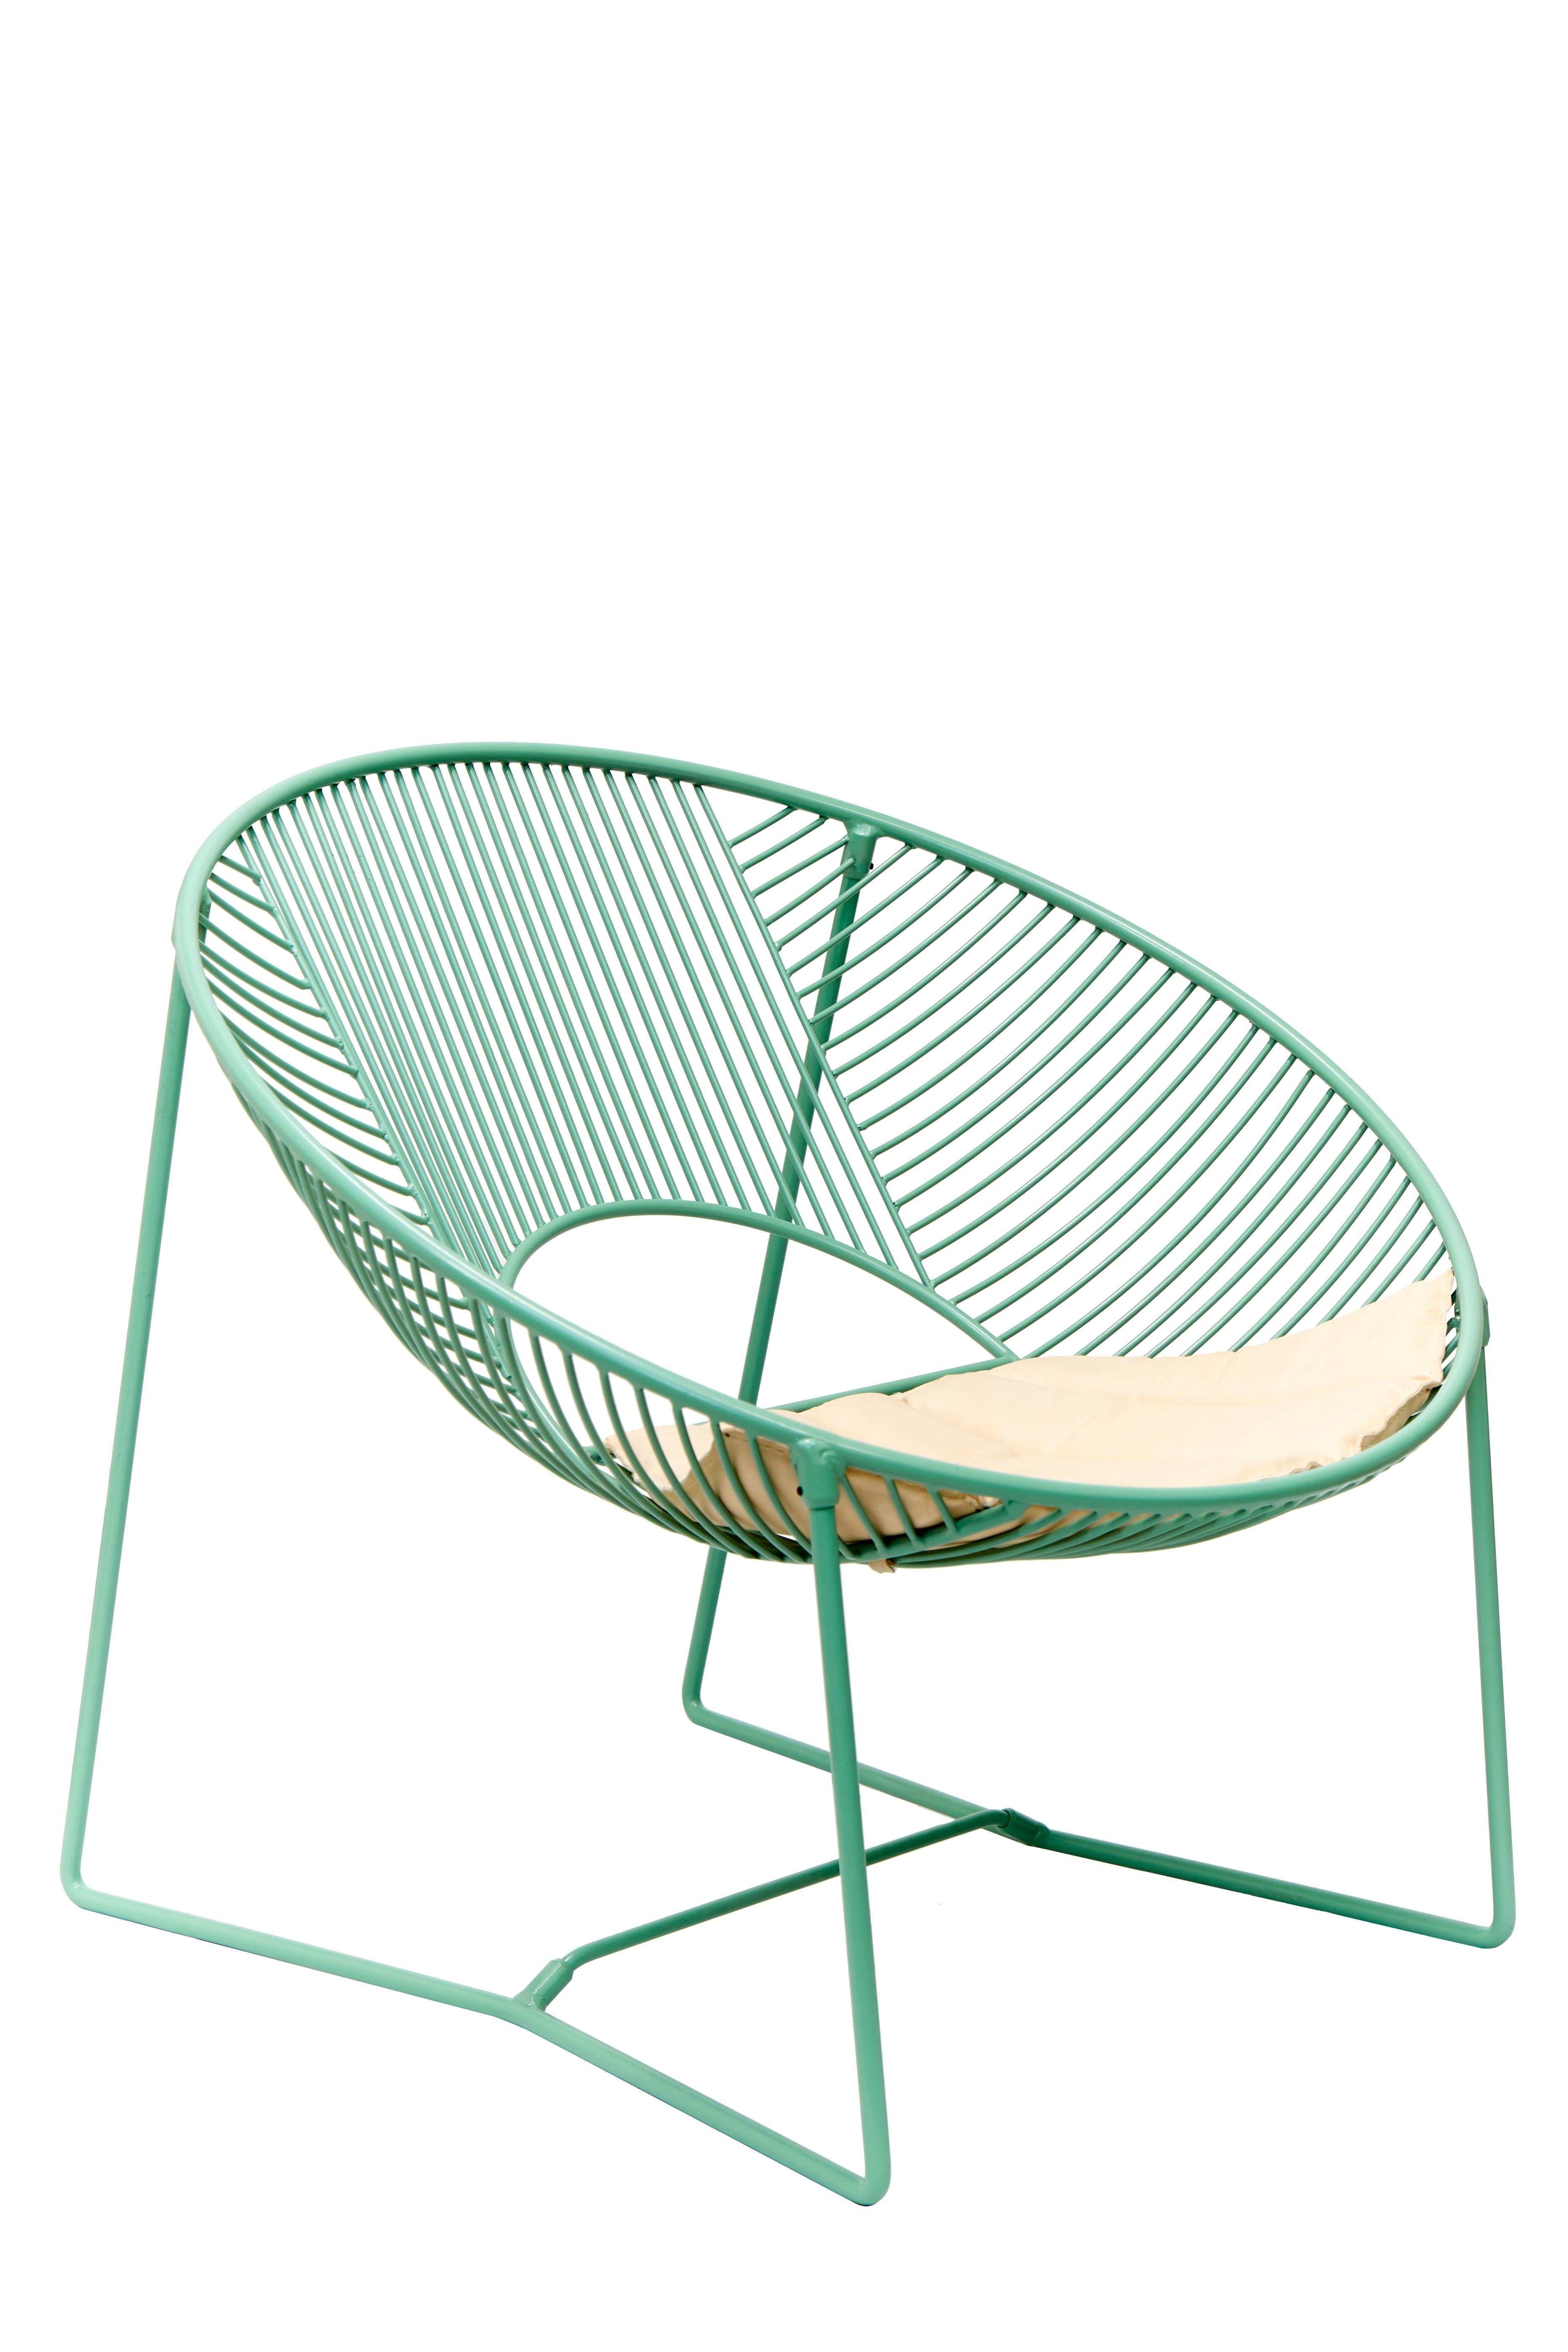 This outdoor lounge chair is a unique creation by León León Design from Mexico City.
It features a solid powder-coated steel structure and can be used either indoor or outdoor.

Handcrafted in small batches, every chair comes with a hand-numbered